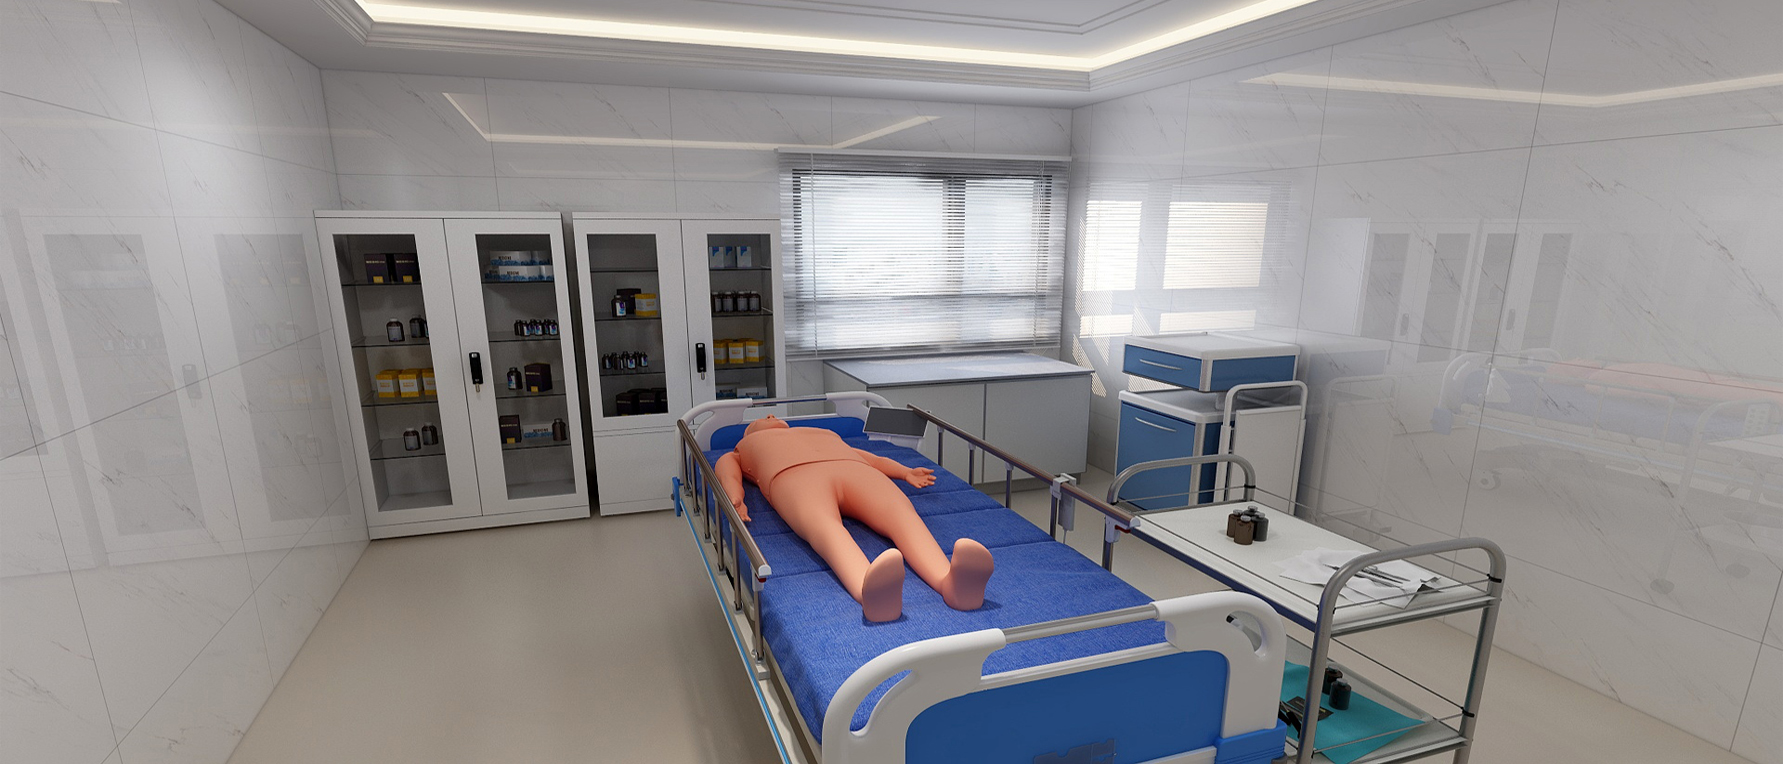 Simulated Operation Room-Anesthesia Recovery Room